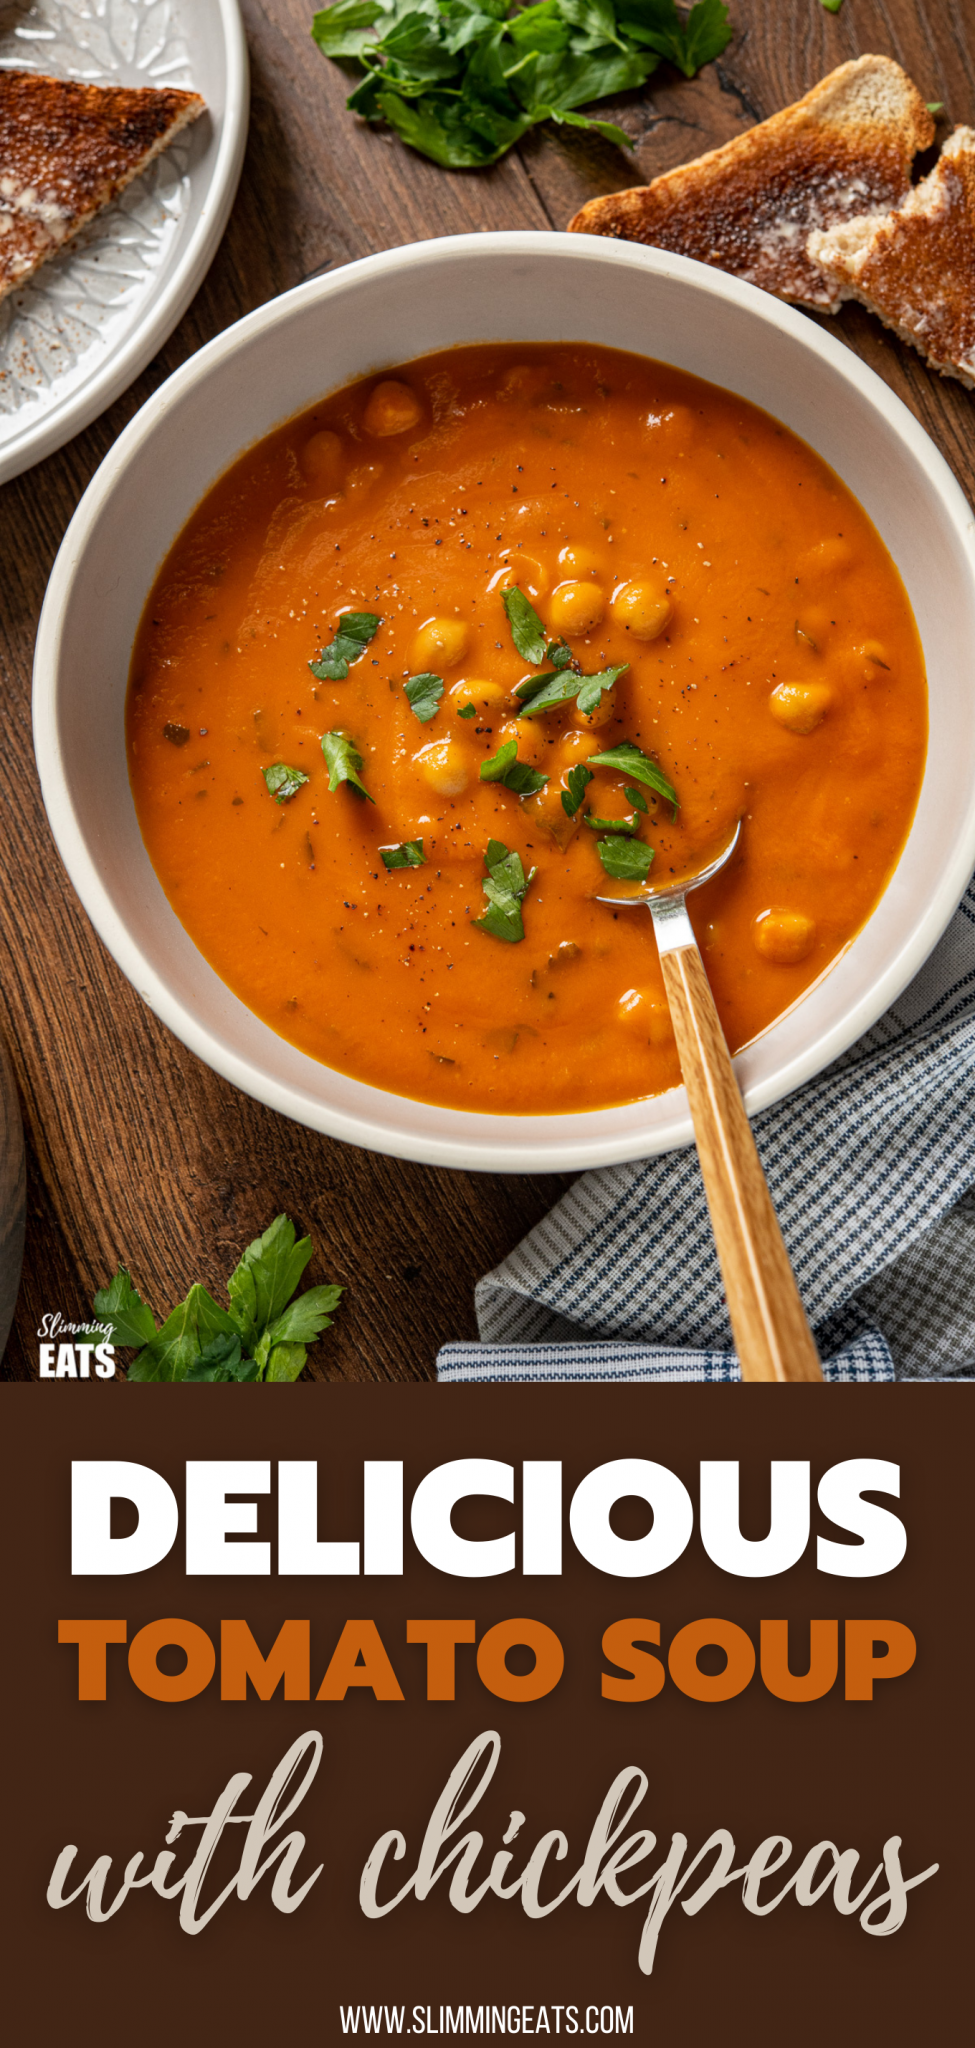 chickpeas and tomato soup in grey bowl with spoon and scattered parsley